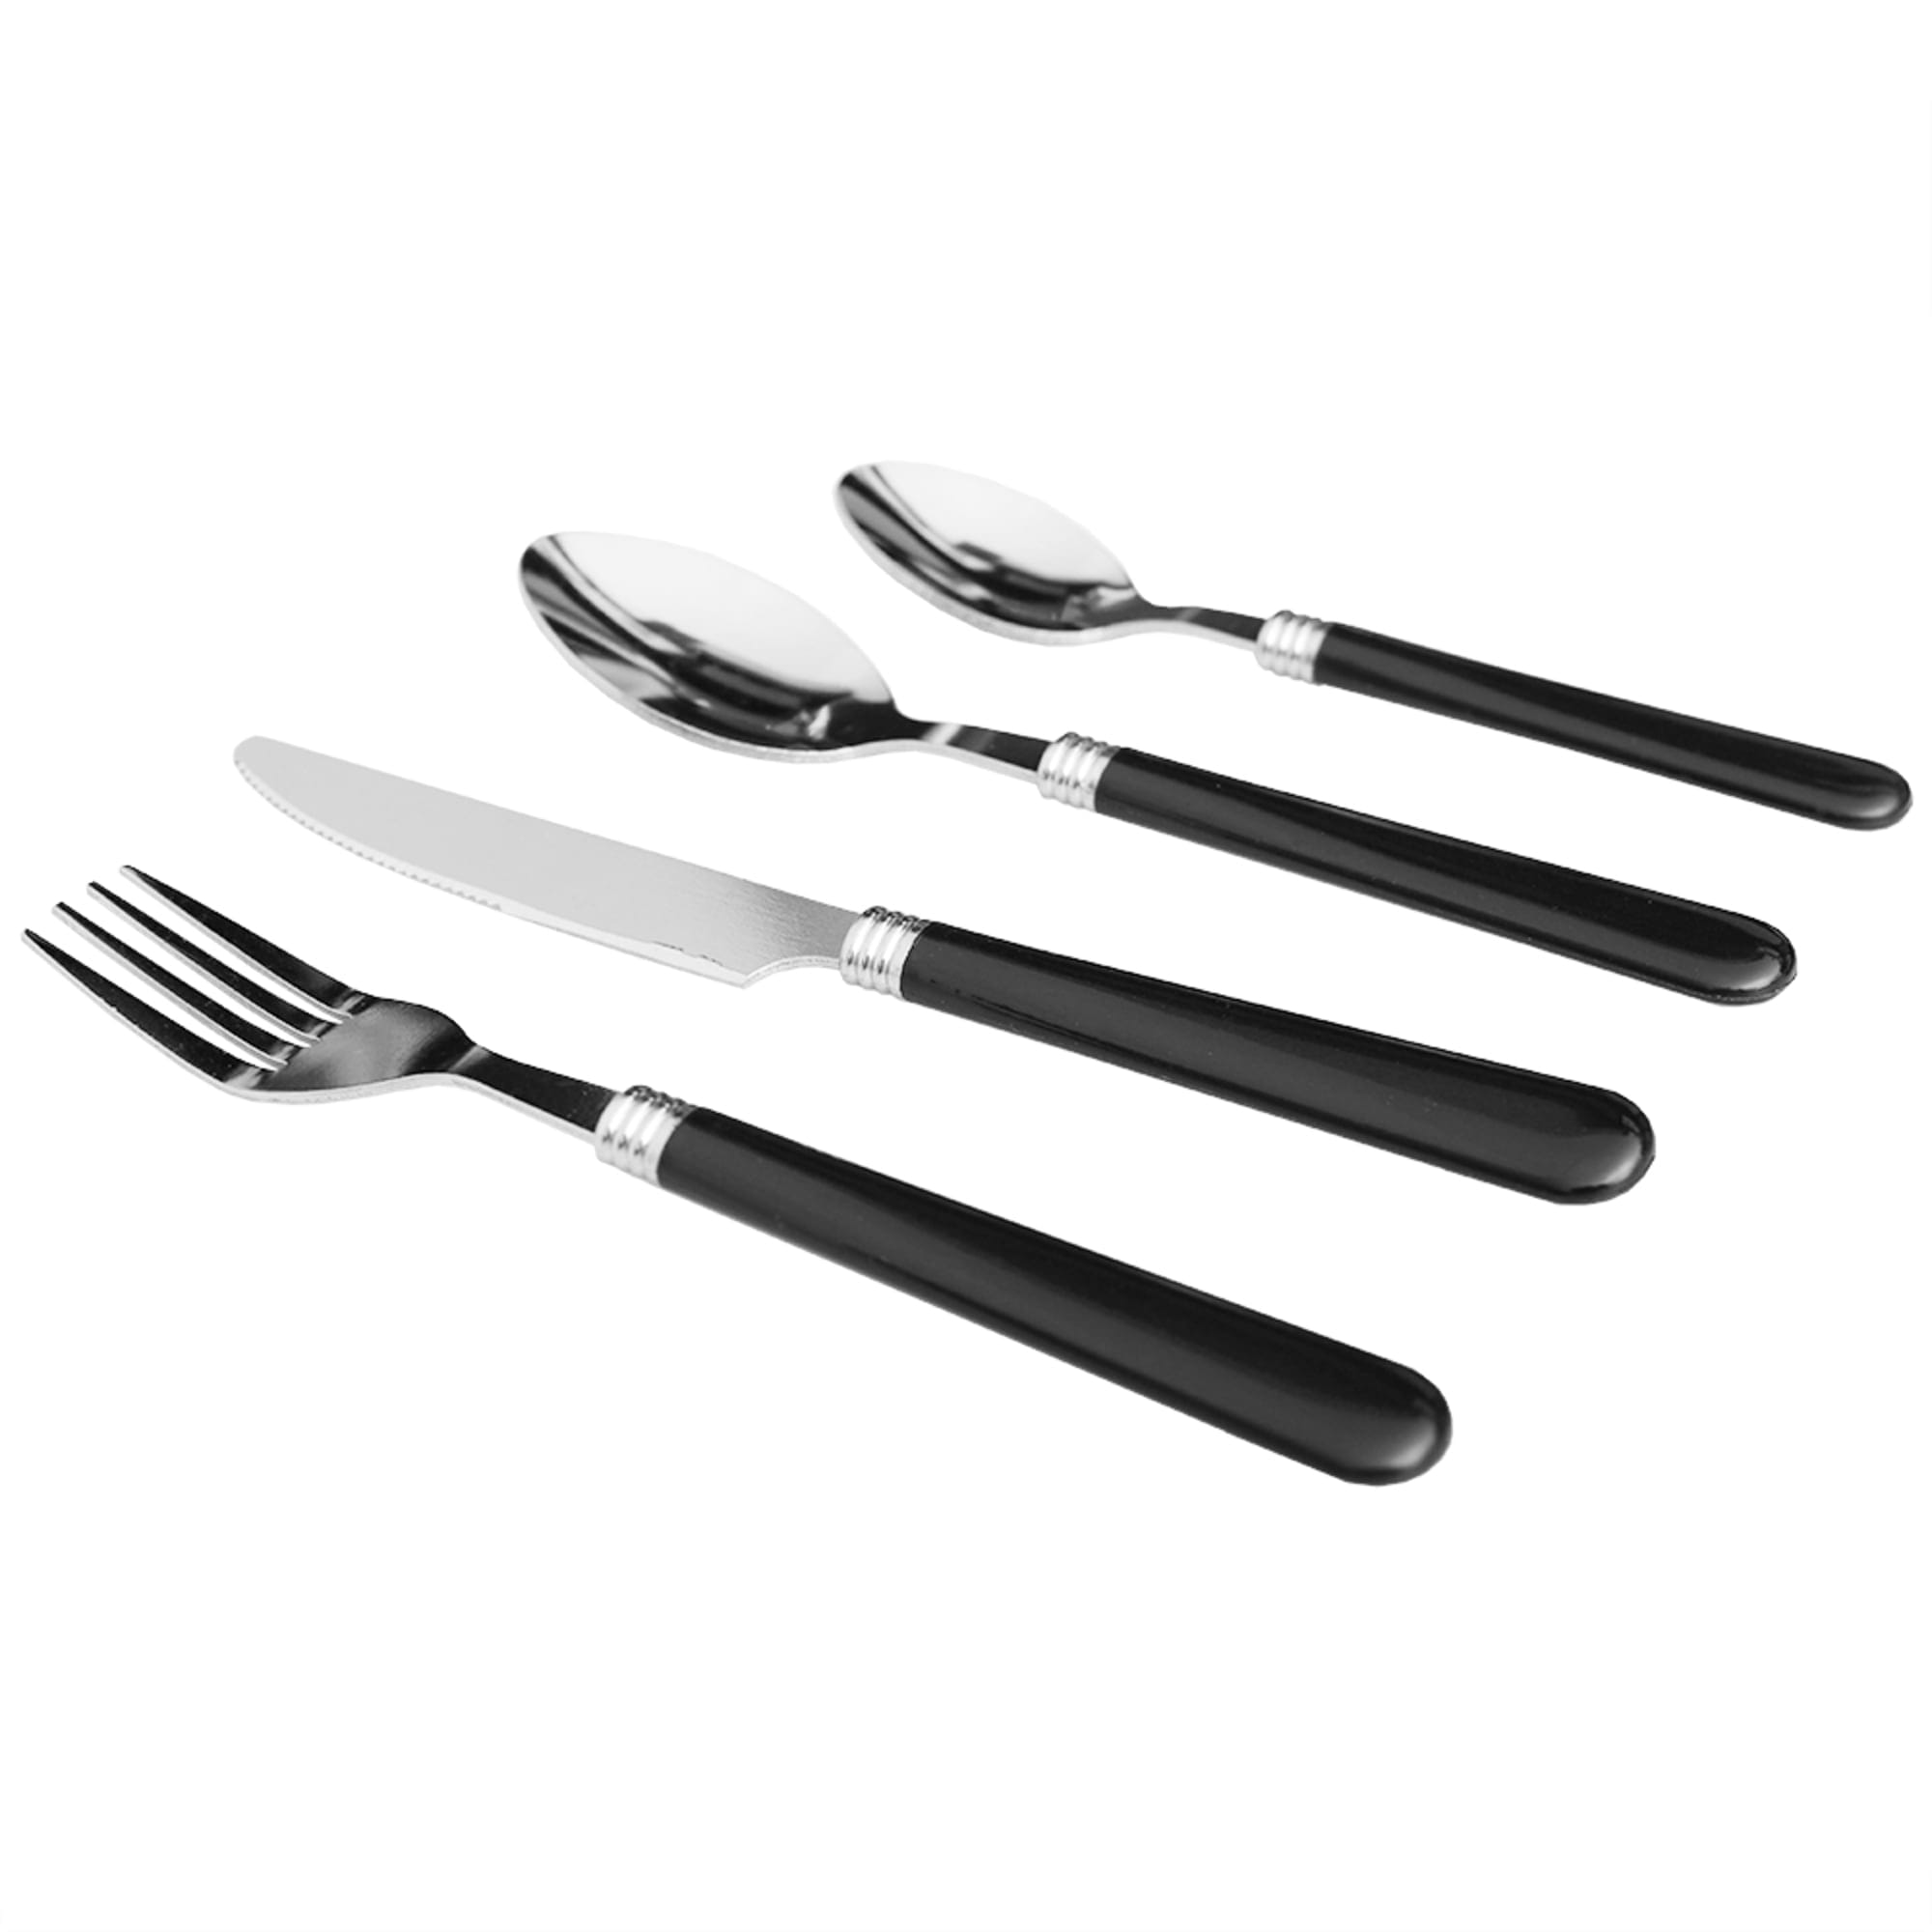 Home Basics 16 Piece Flatware with Plastic Handles $4.00 EACH, CASE PACK OF 12